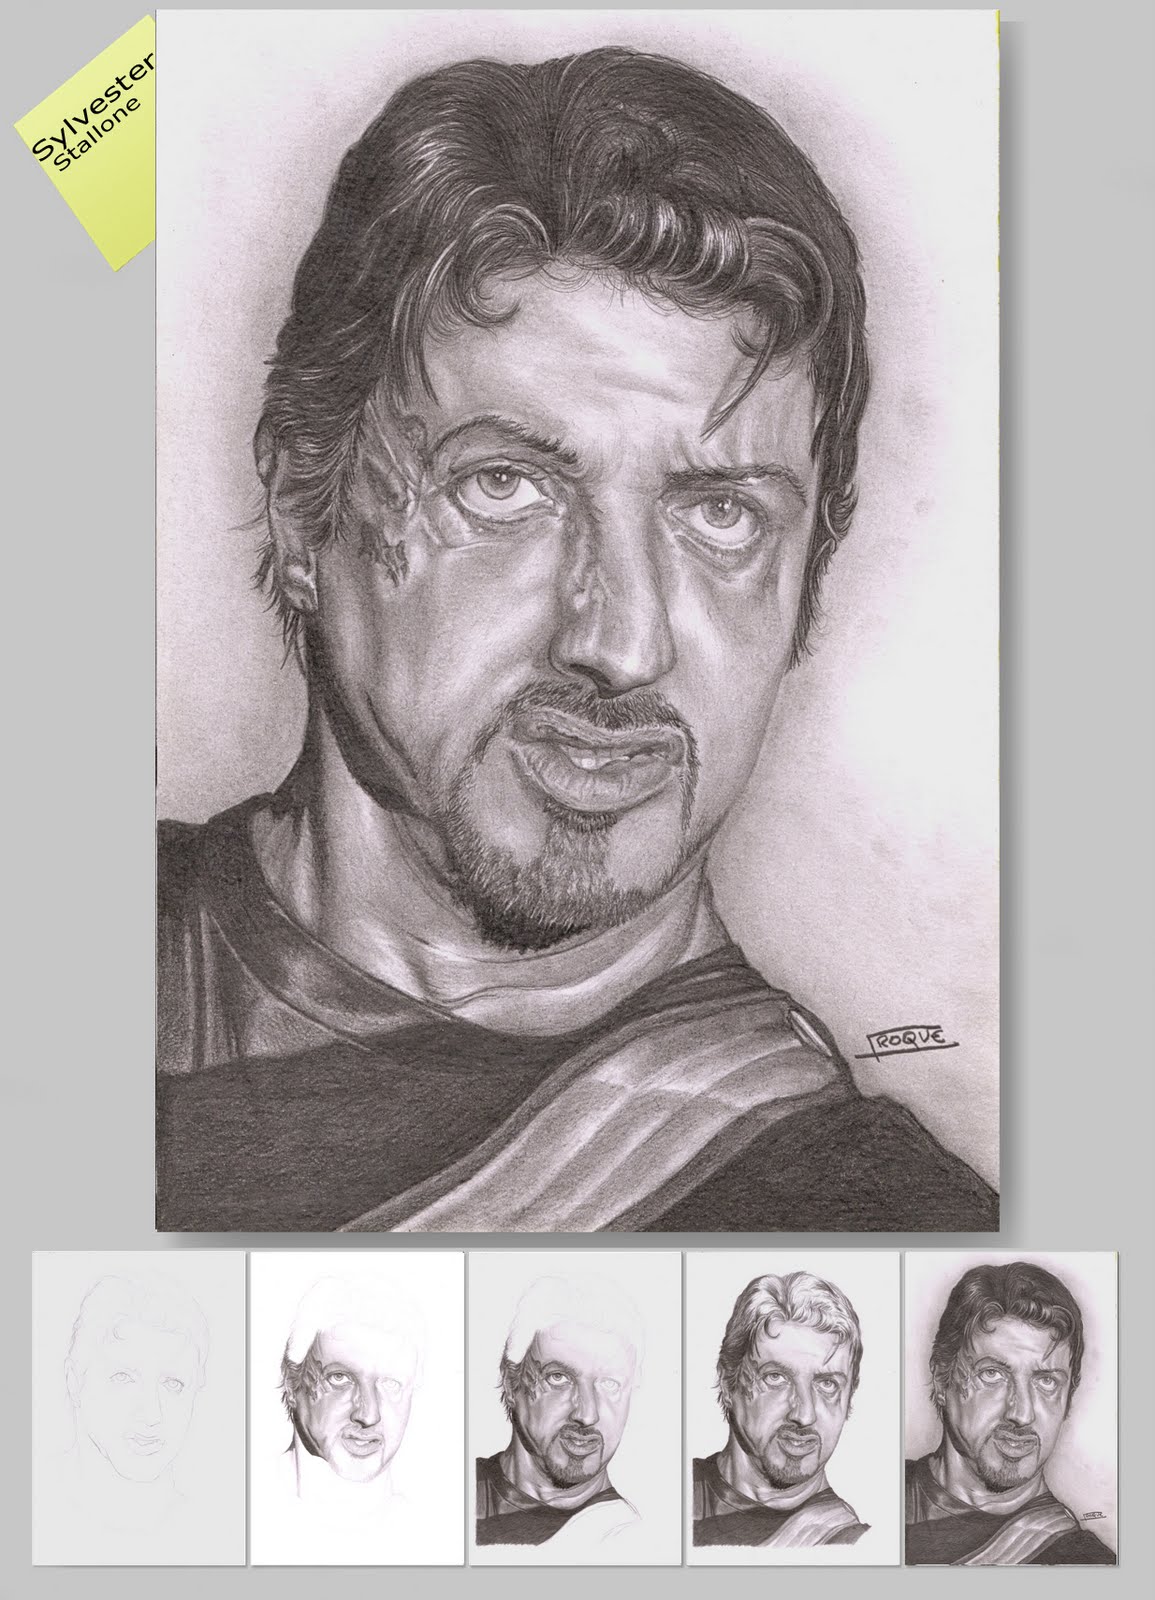 Dessins ou caricatures - Page 14 Sylvester+Stallone